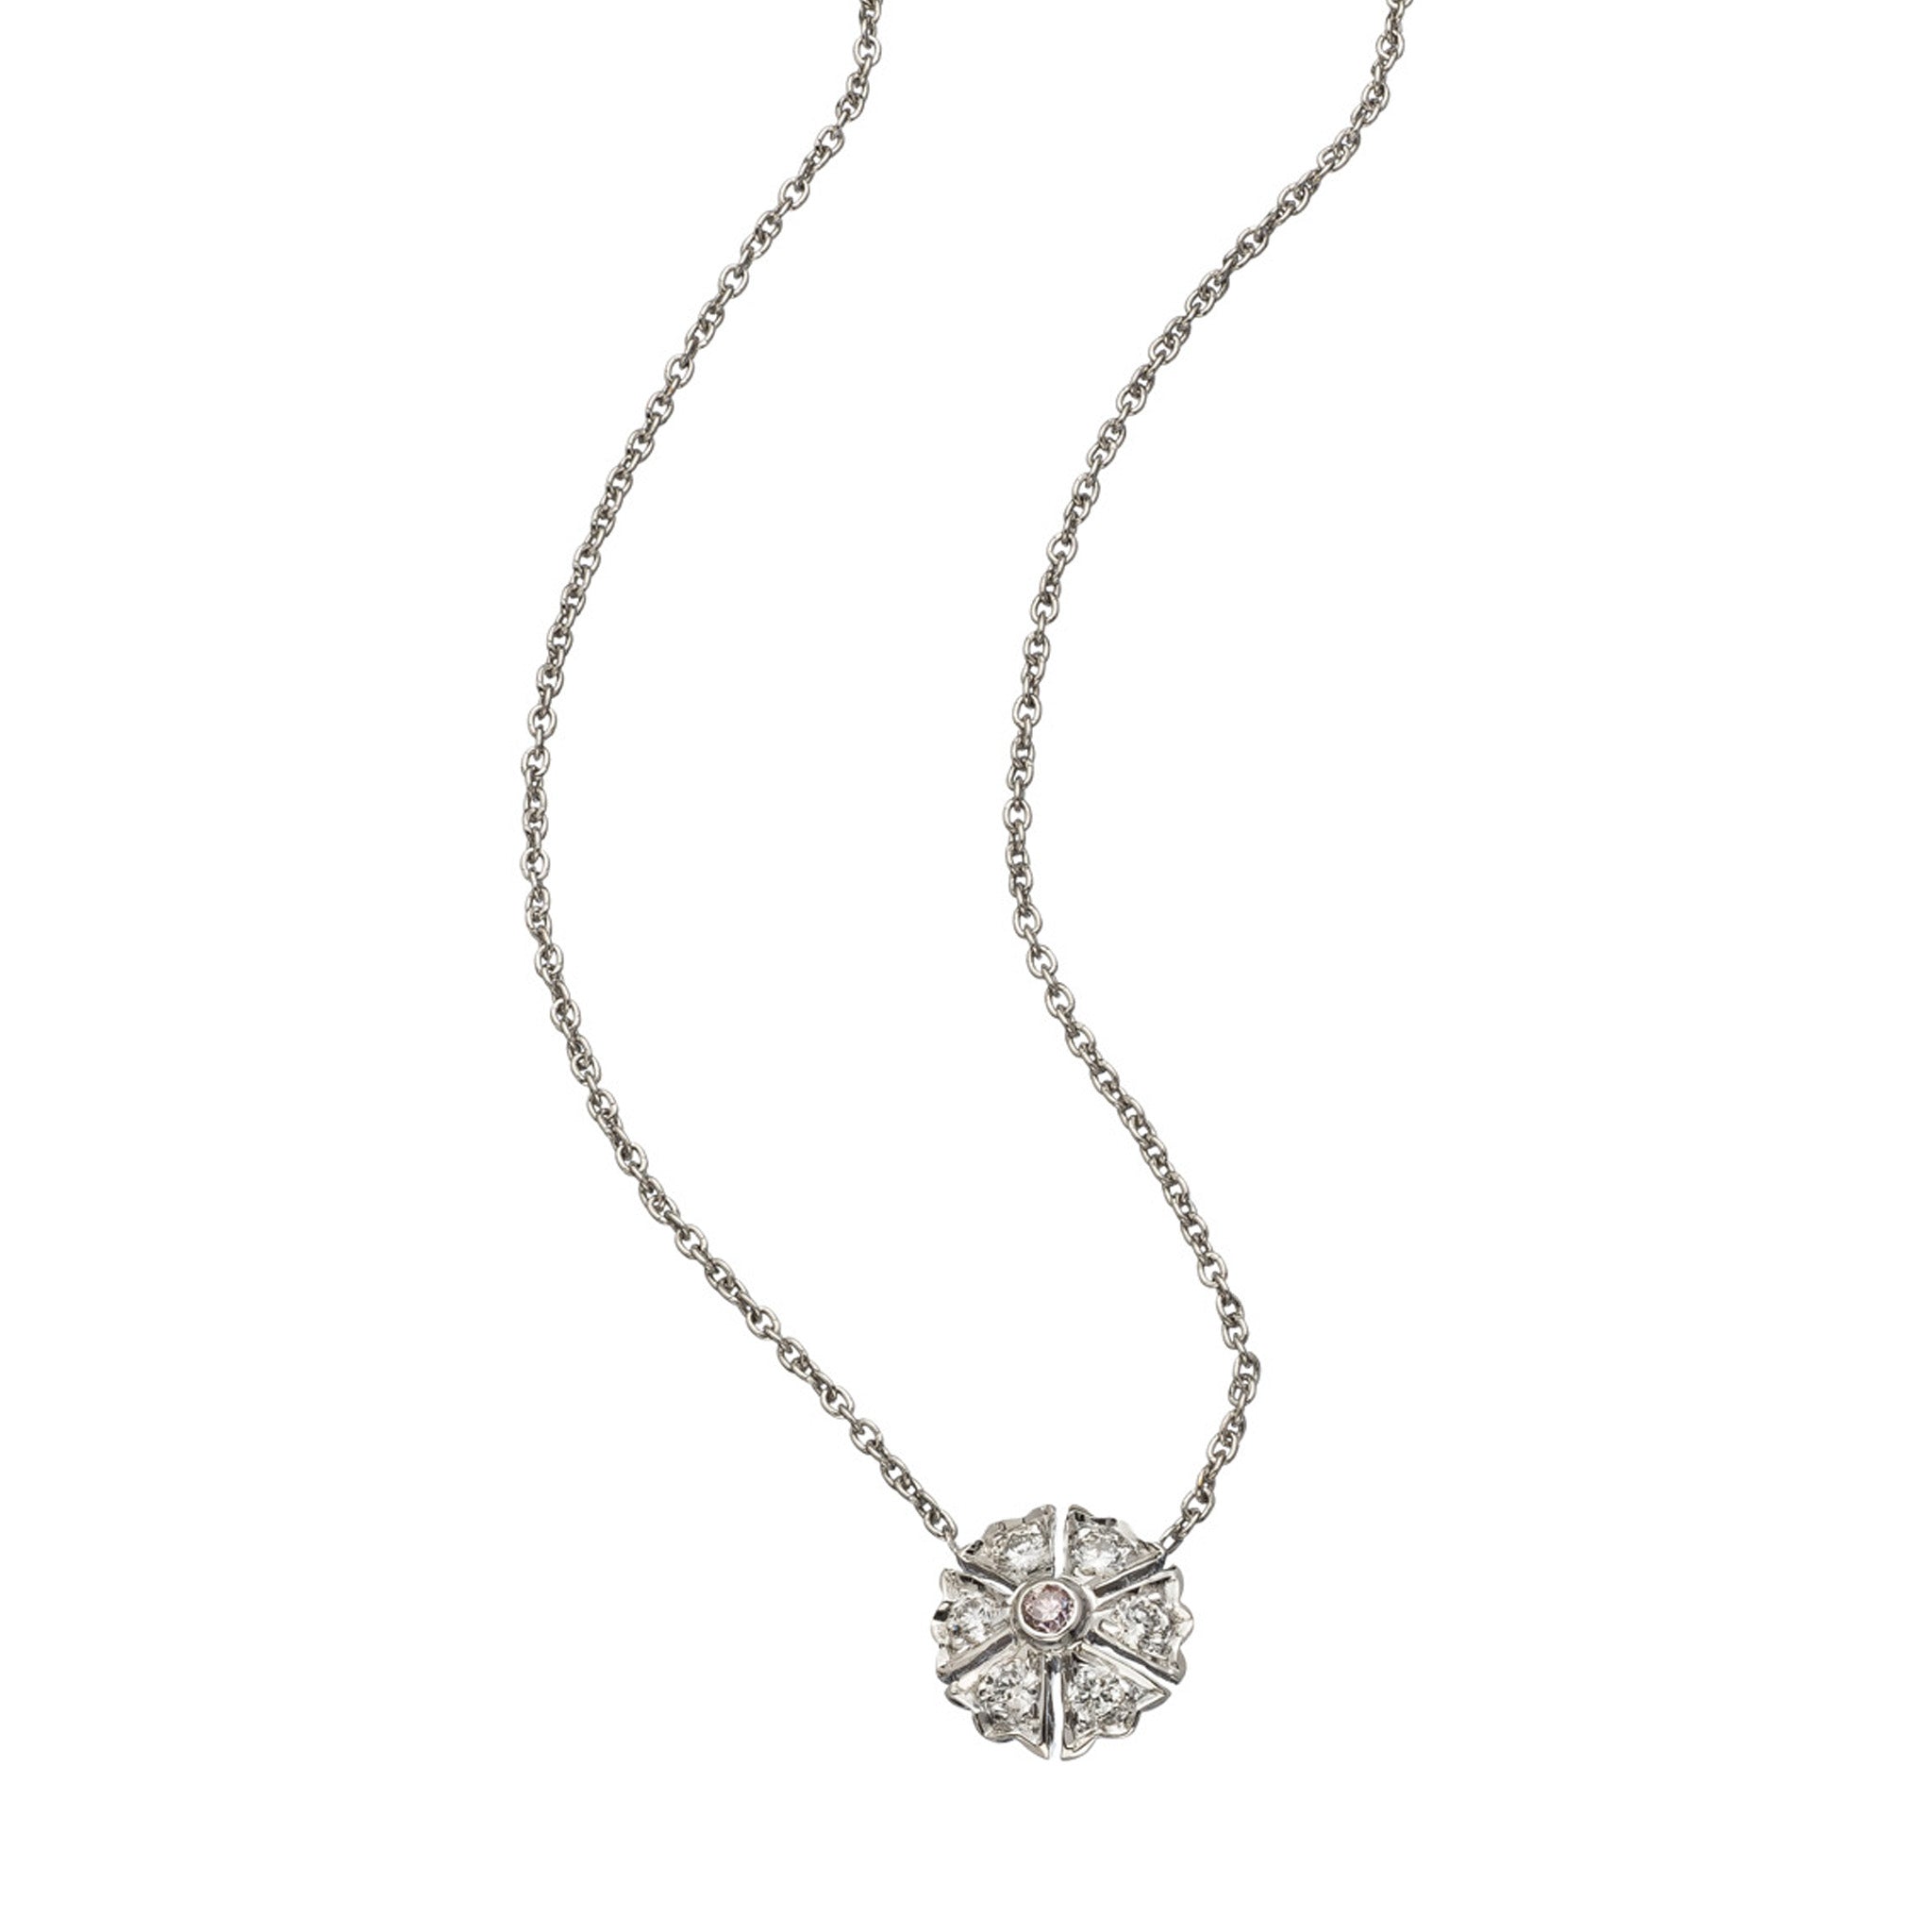 The Camelia Necklace - White